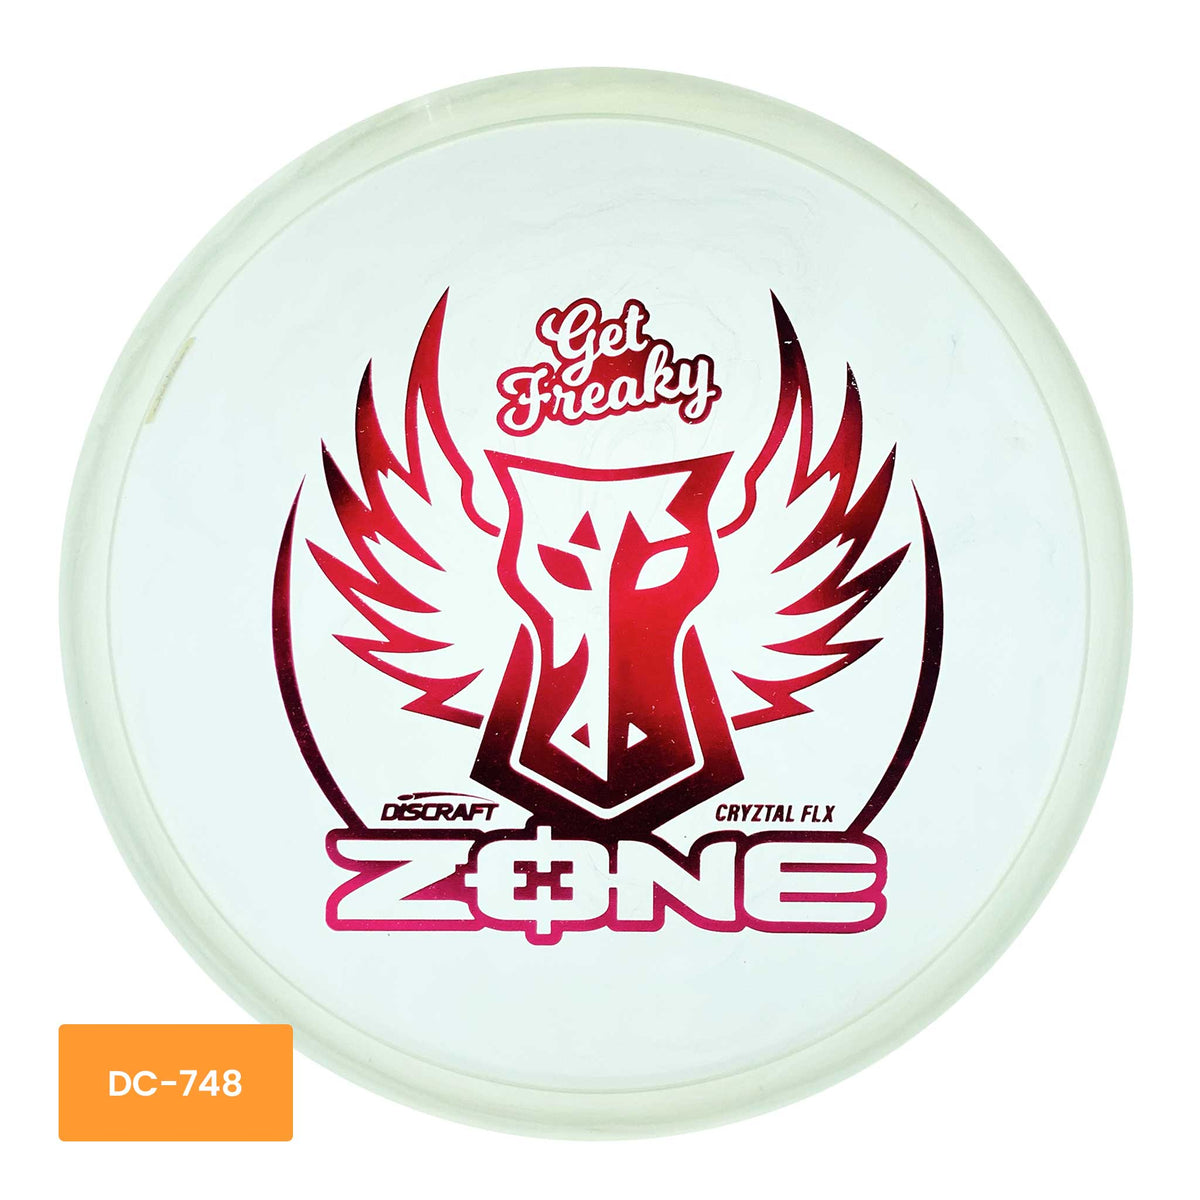 Discraft Brodie Smith CryZtal FLX Zone putter and approach - Clear